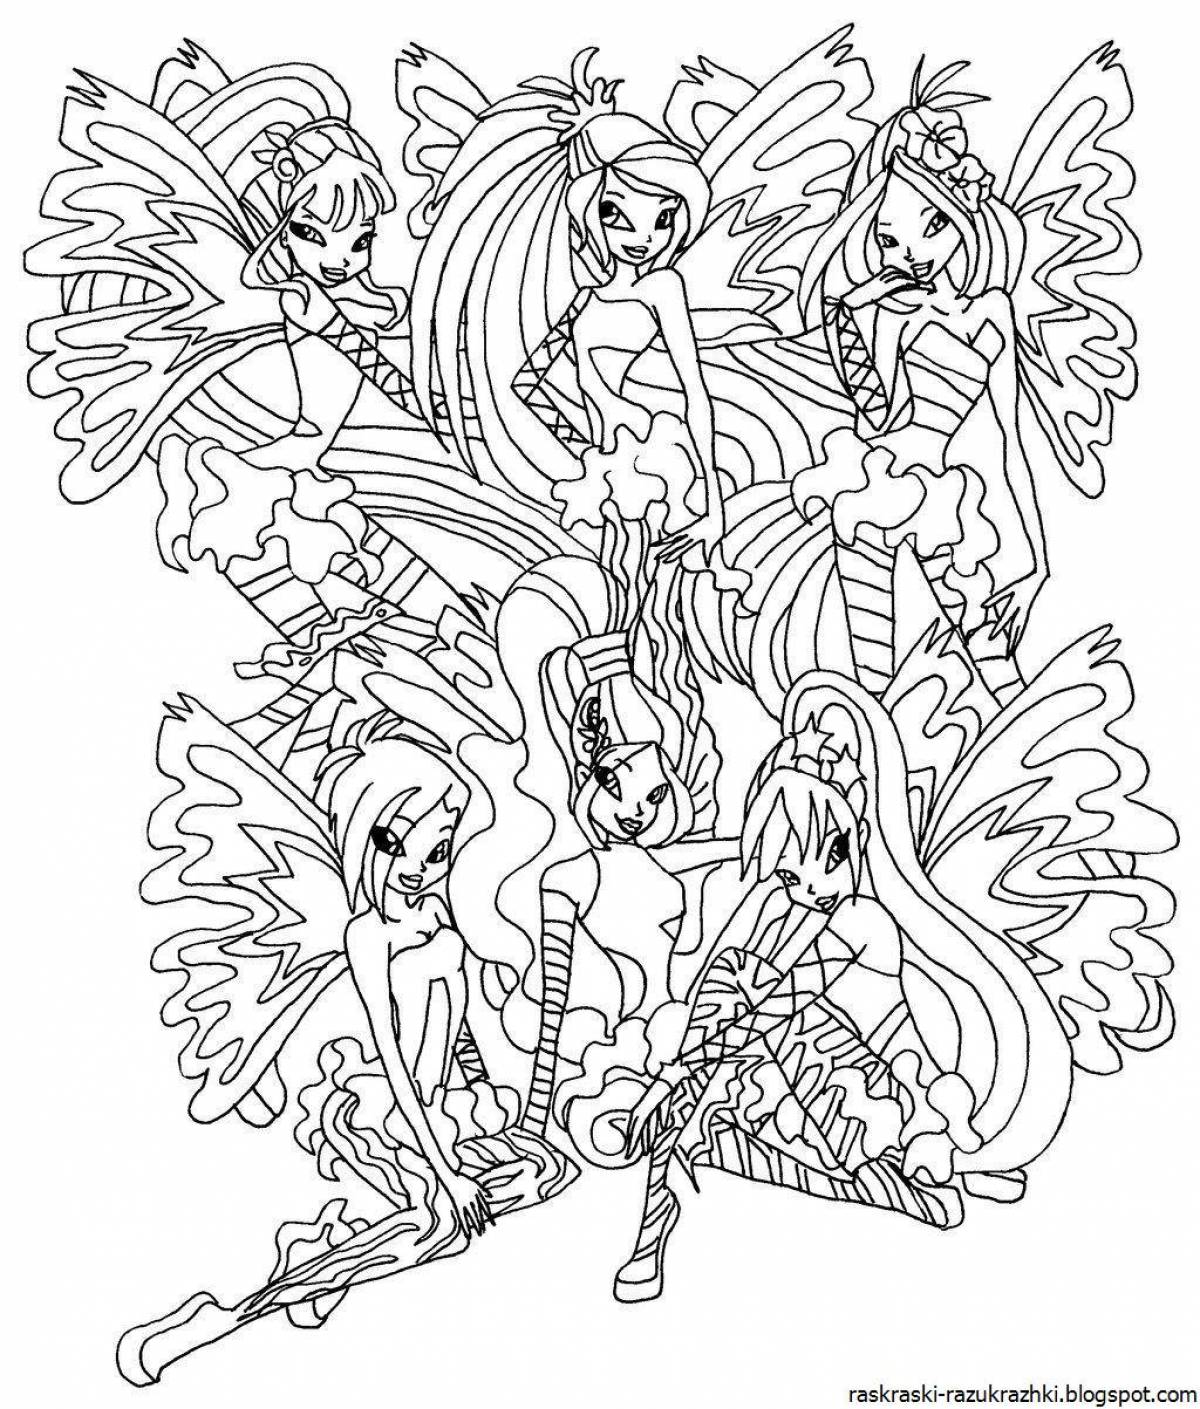 Gorgeous winx fairy coloring book